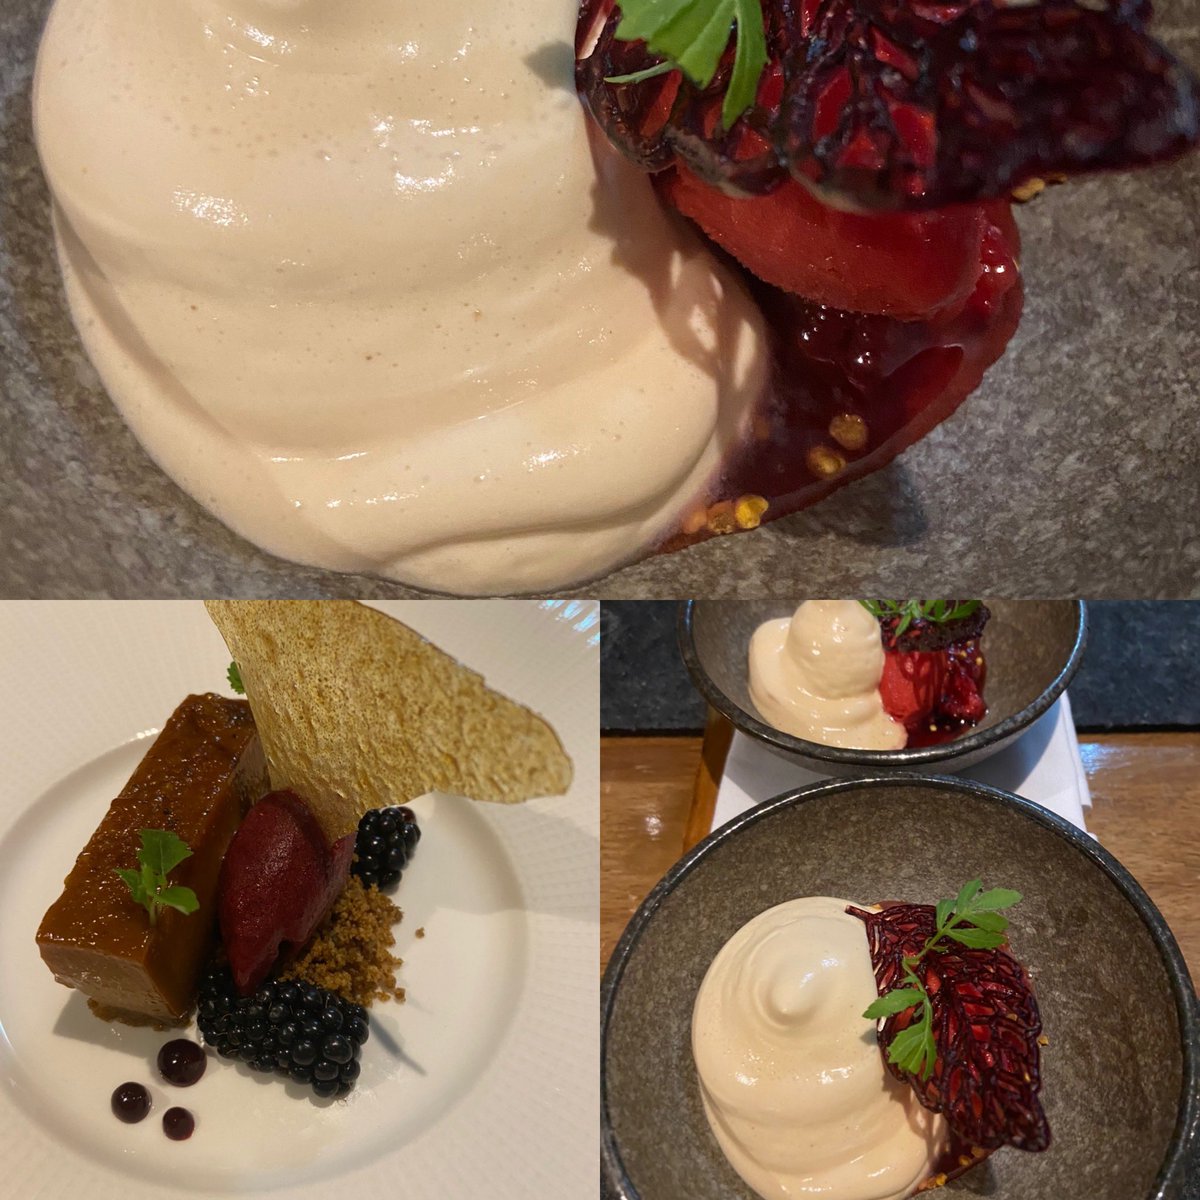 The Hedgerows #Queenofthemeadow #Brambles cleansing dish followed by a lovely dessert @oldstamphouse @MichelinGuideUK